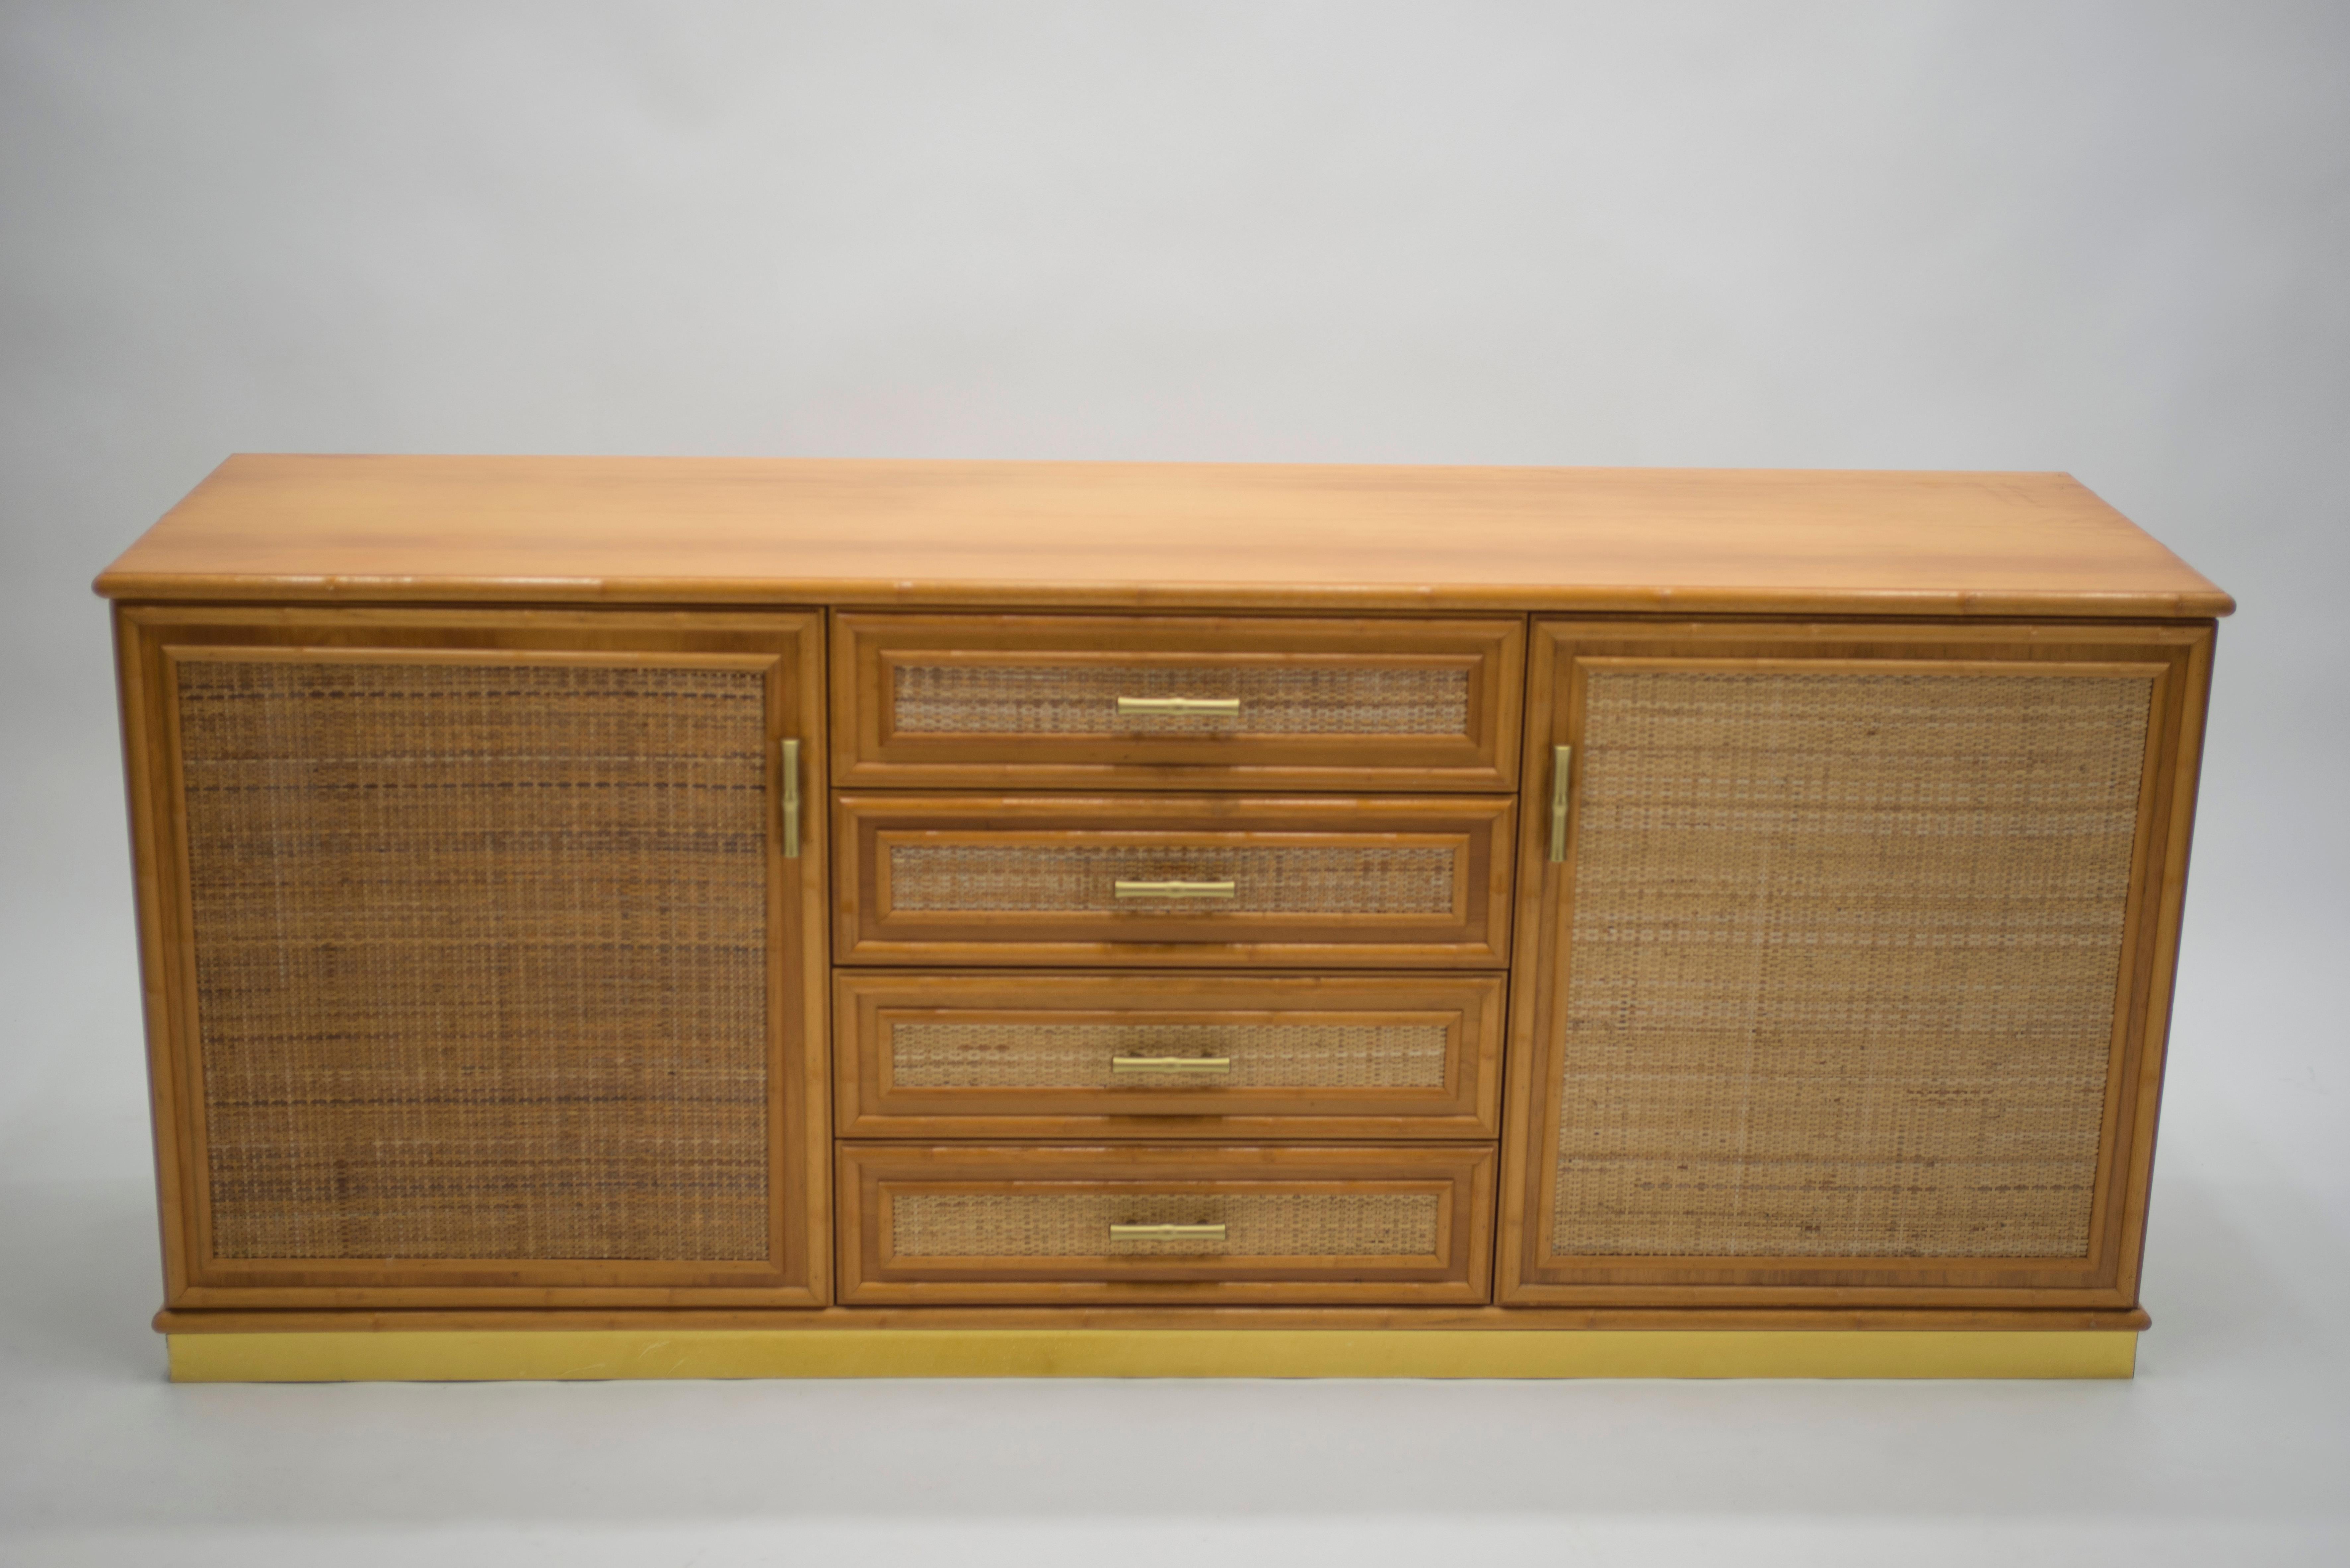 Natural bamboo as the chief material creates a summery, organic aesthetic in this 1970s sideboard, while a bright brass base and accents are strong, eye-catching touches. In particular, the brass handles on the drawers and doors are lovely examples